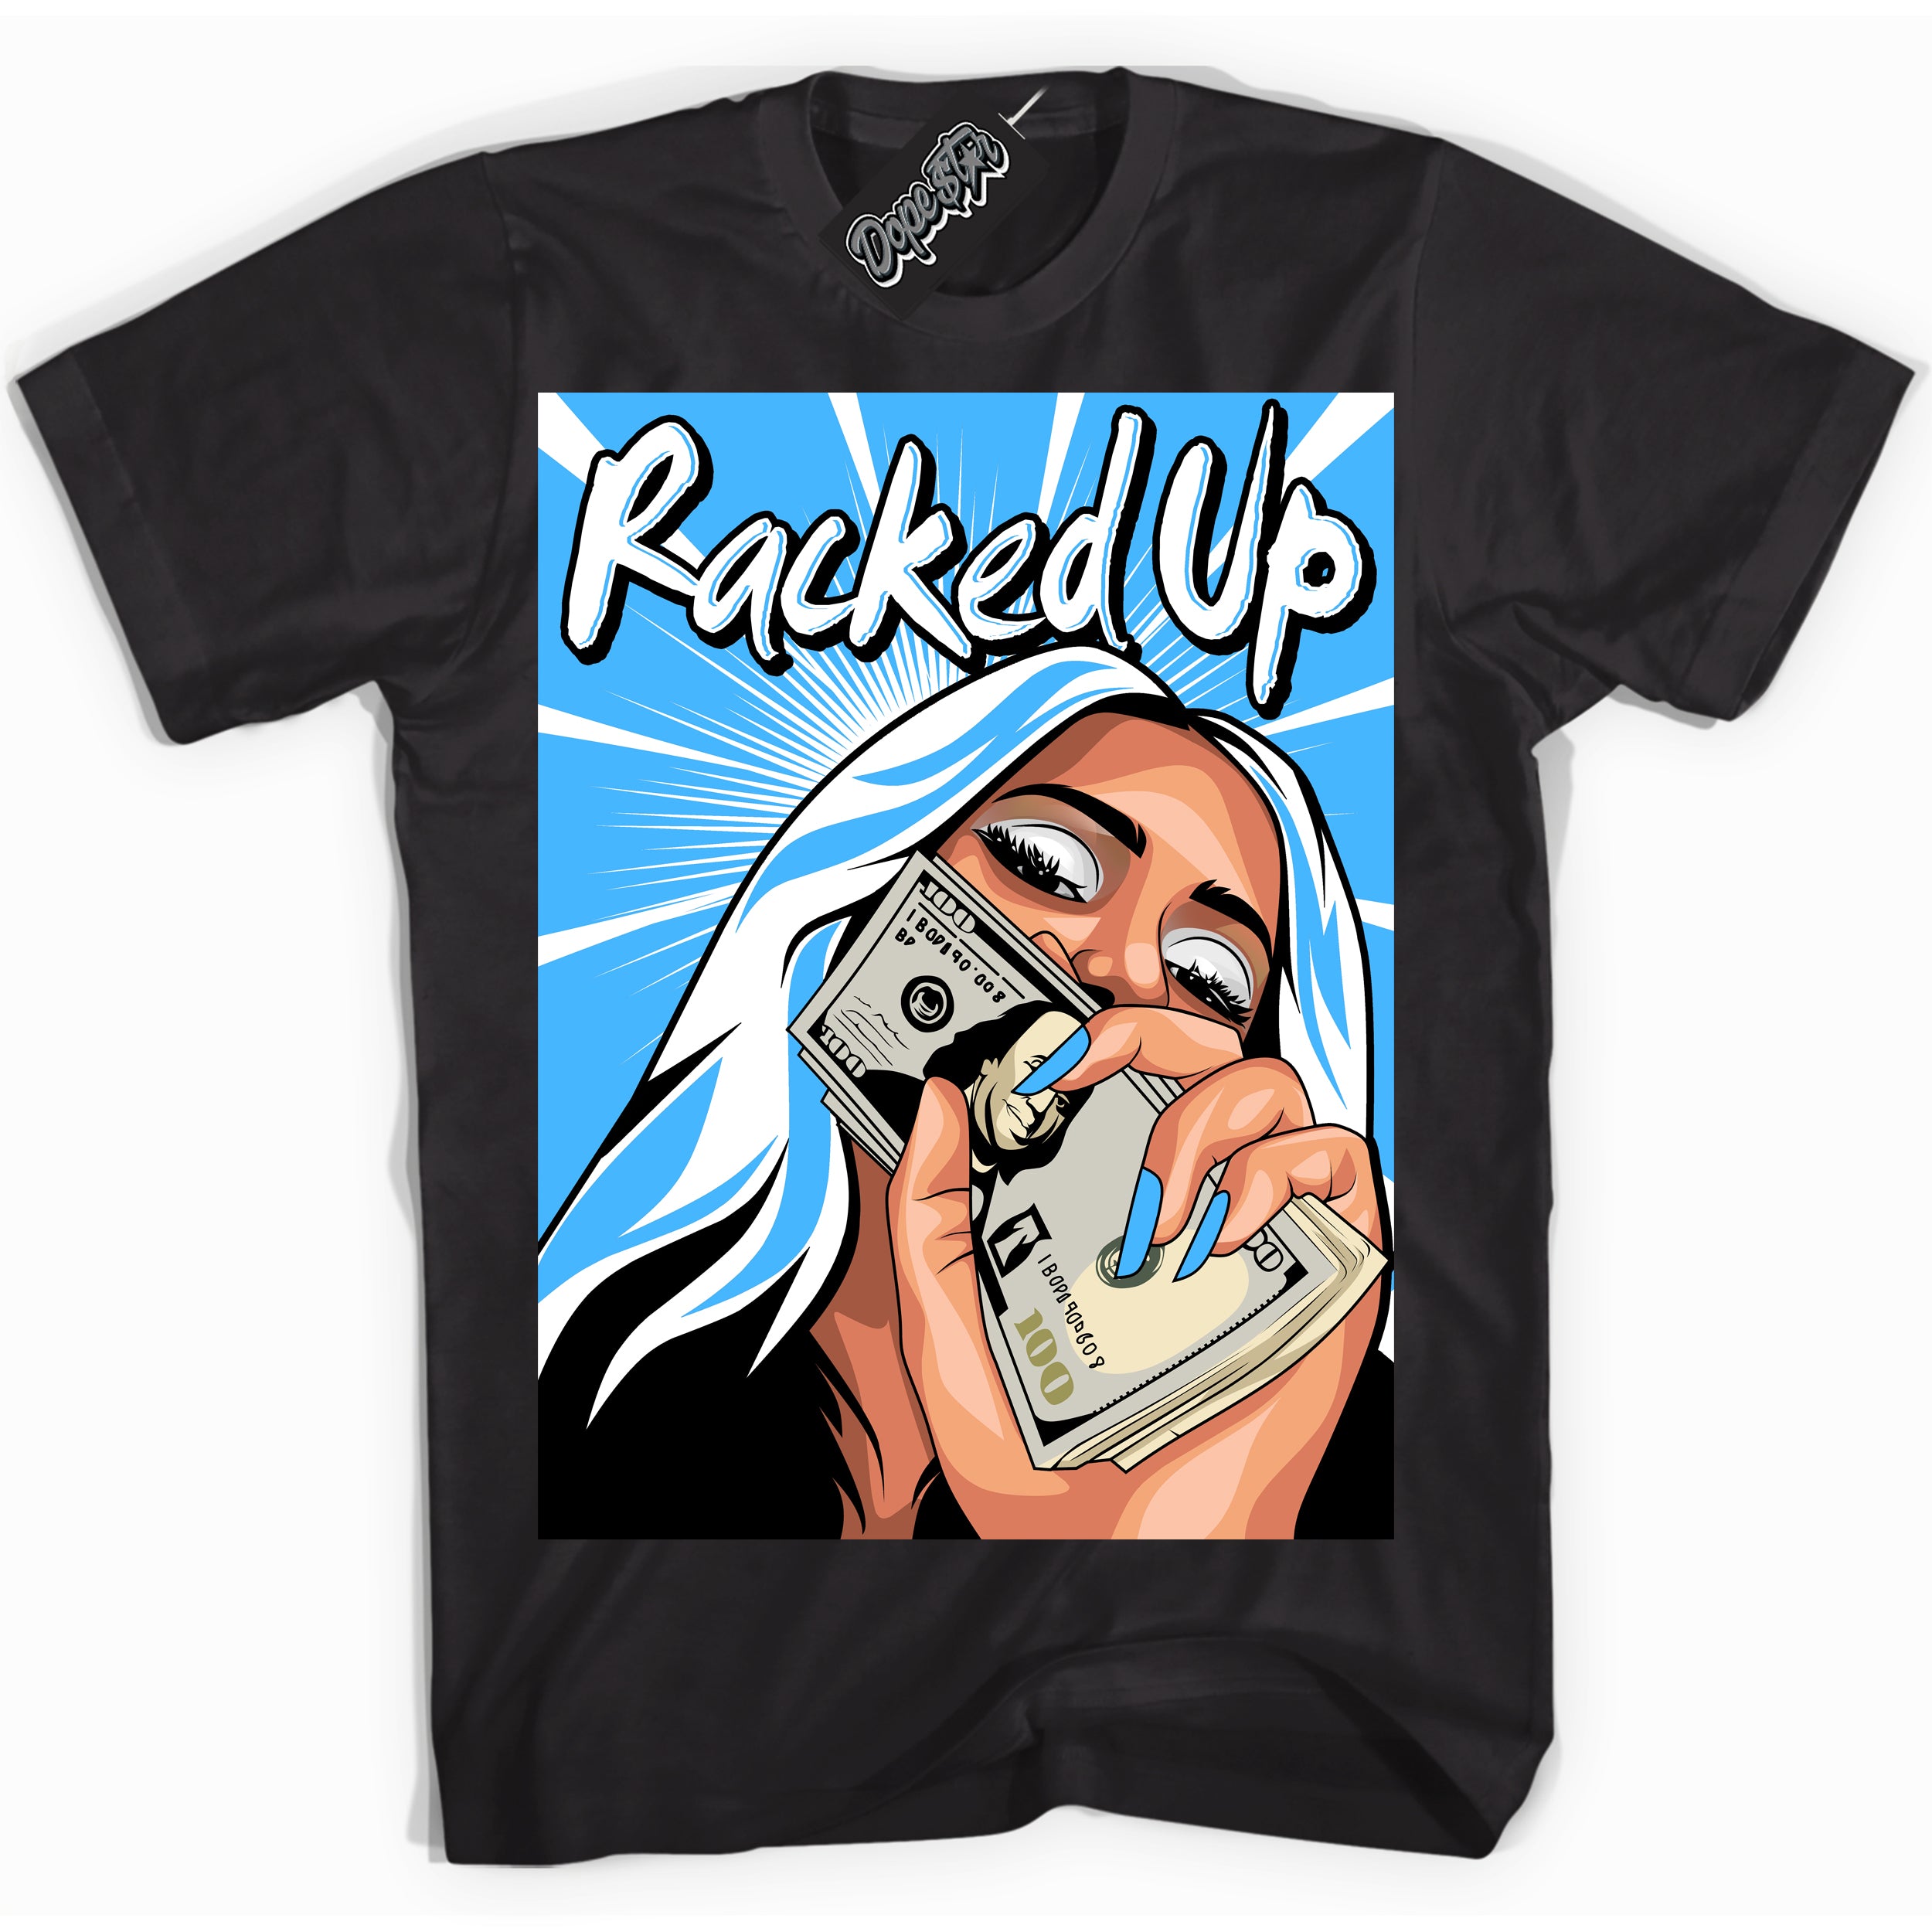 Cool Black graphic tee with “ Racked Up ” design, that perfectly matches Powder Blue 9s sneakers 